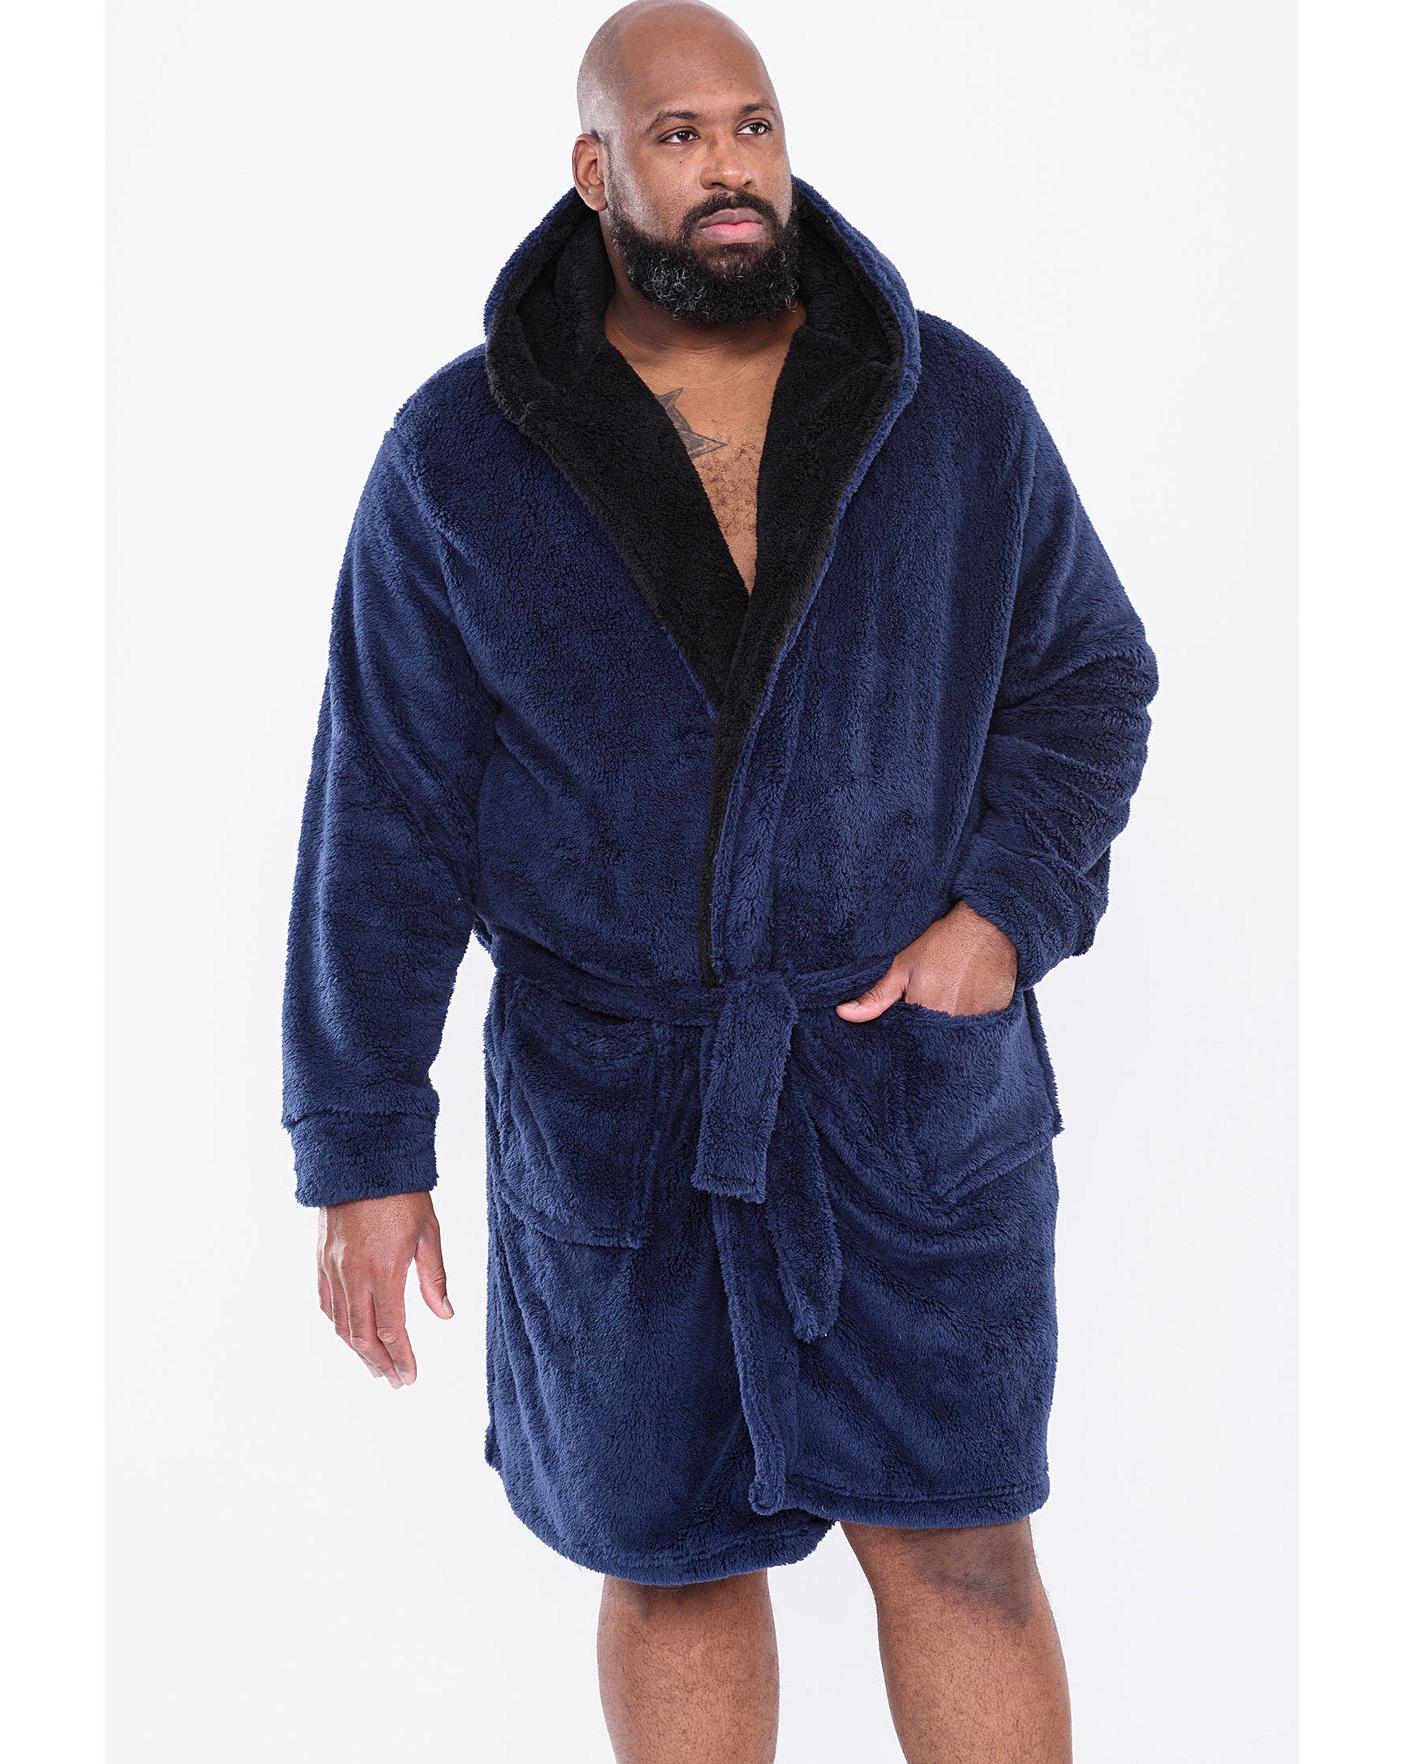 Buy Navy Blue Supersoft Hooded Dressing Gown from the Next UK online shop